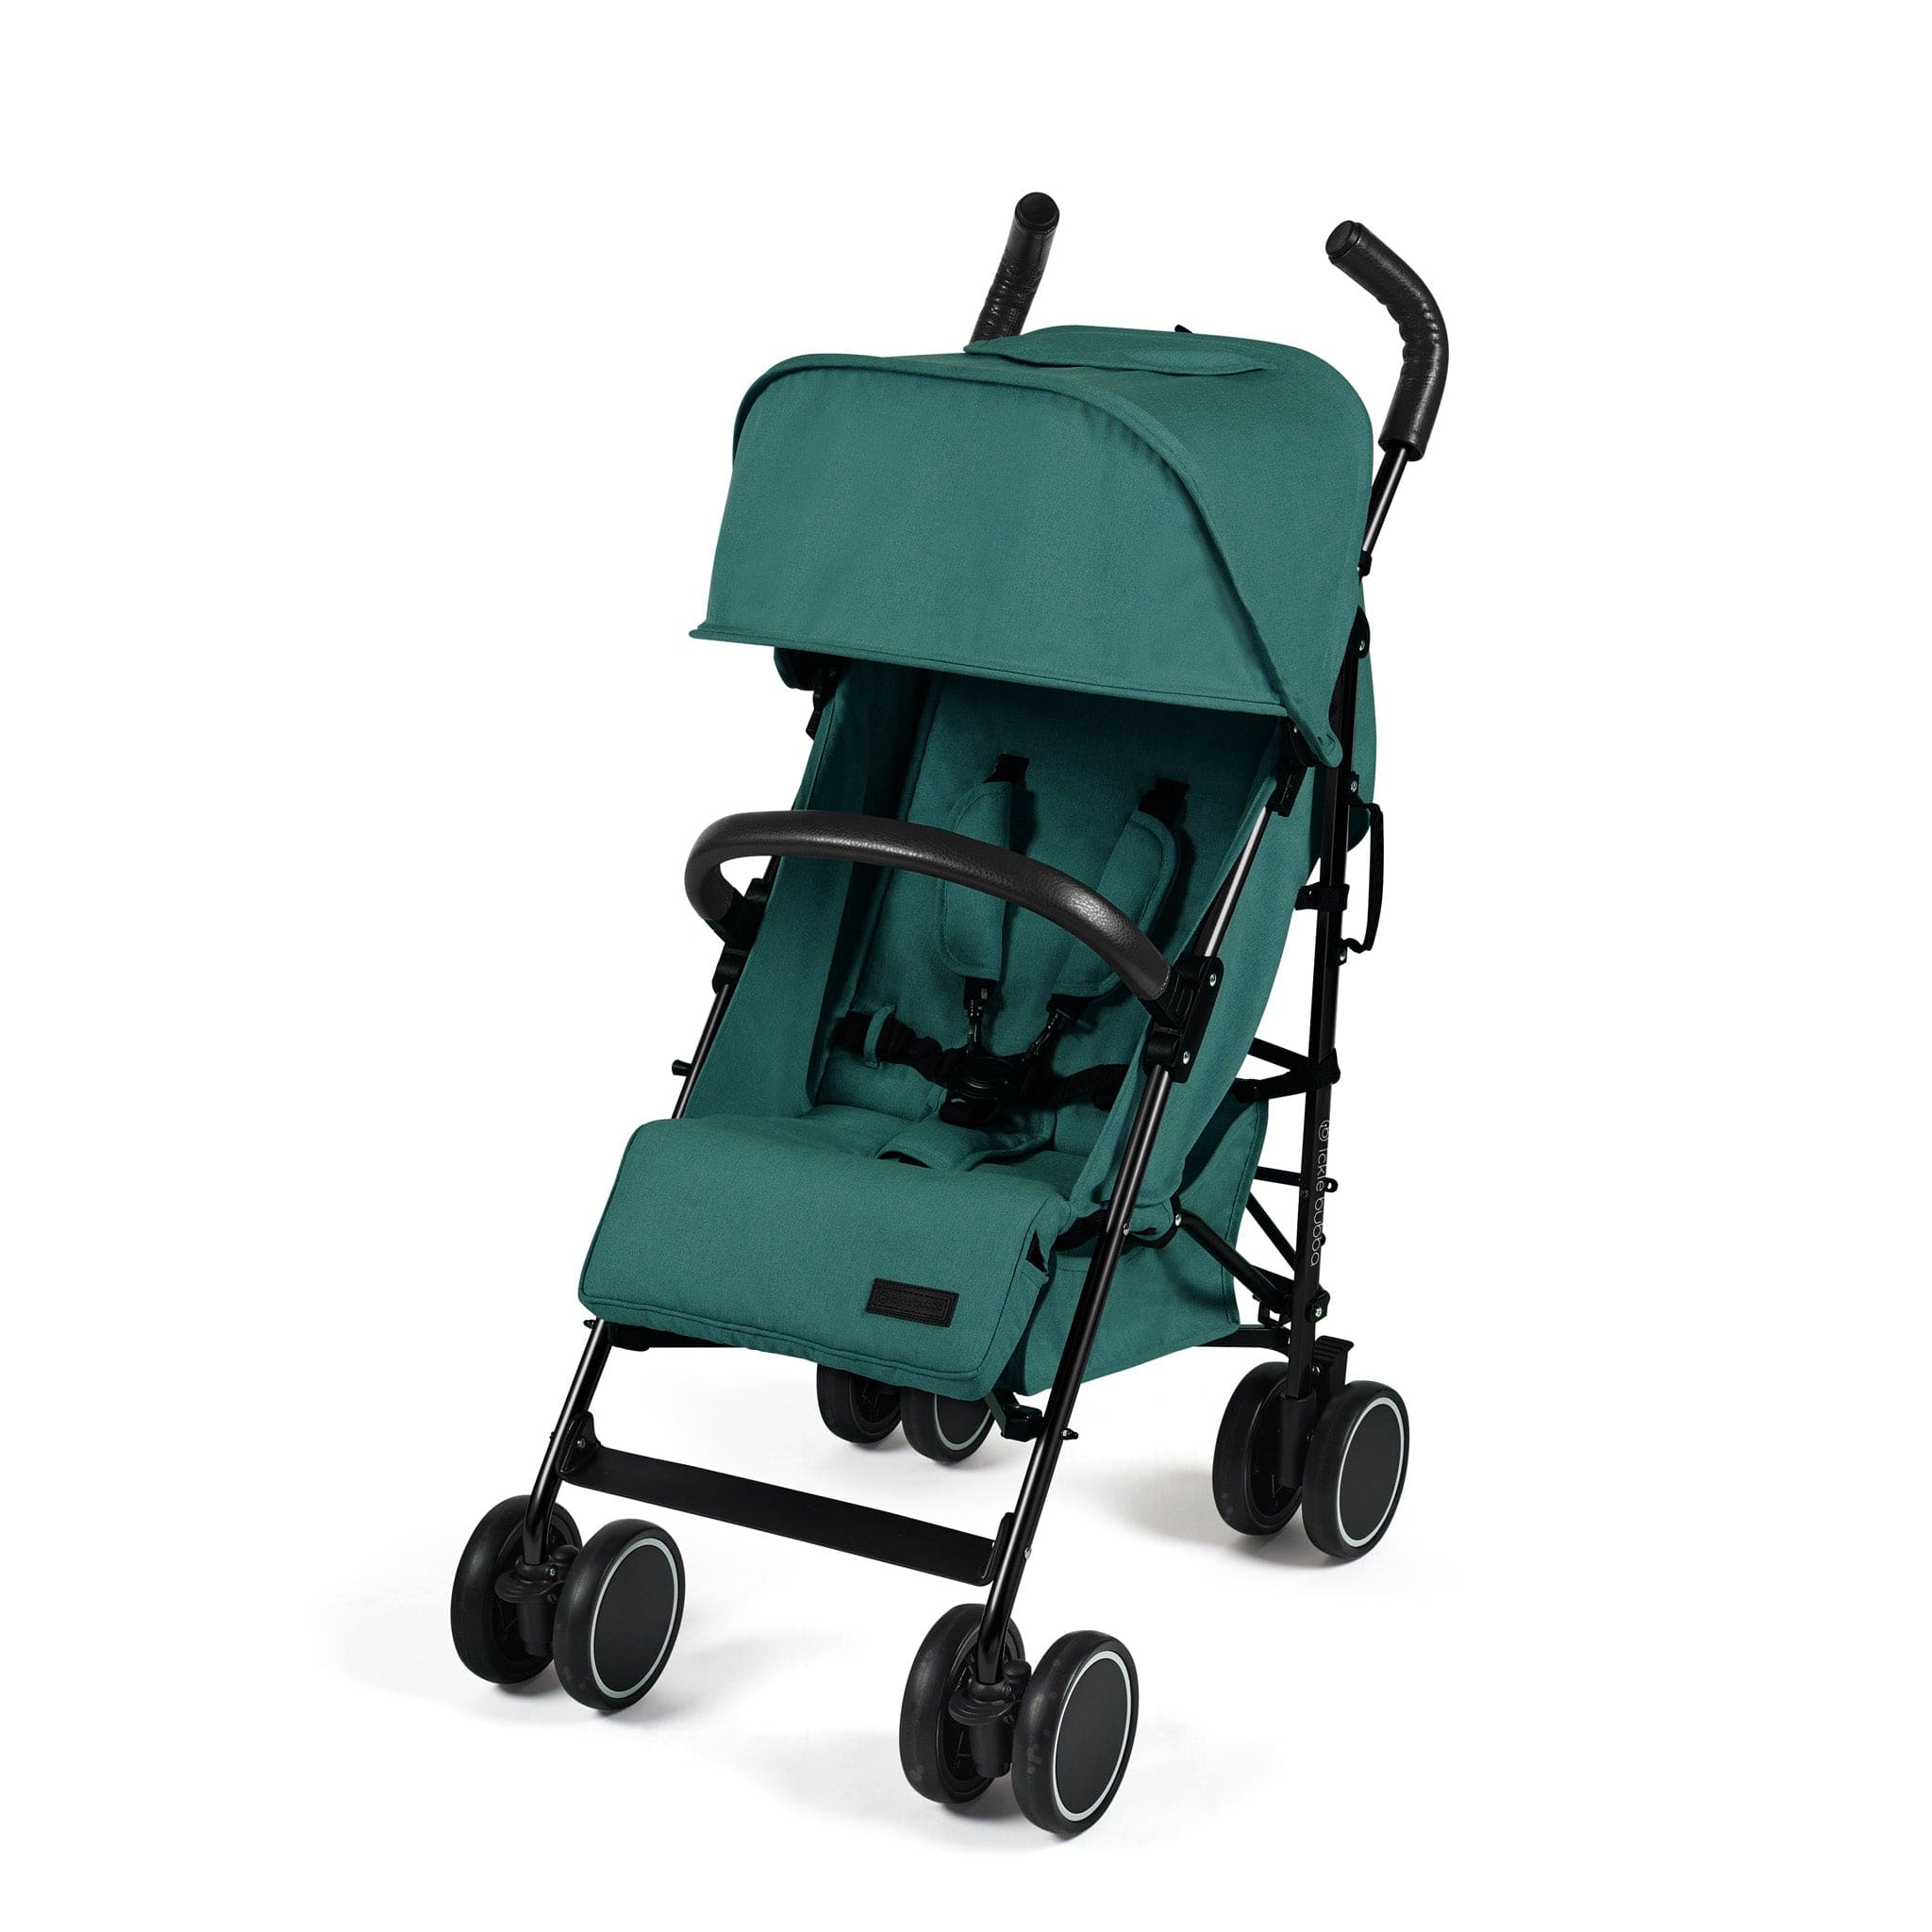 Ickle Bubba baby pushchairs Ickle Bubba Discovery Prime Pushchair Teal/Matt Black 15-002-300-119